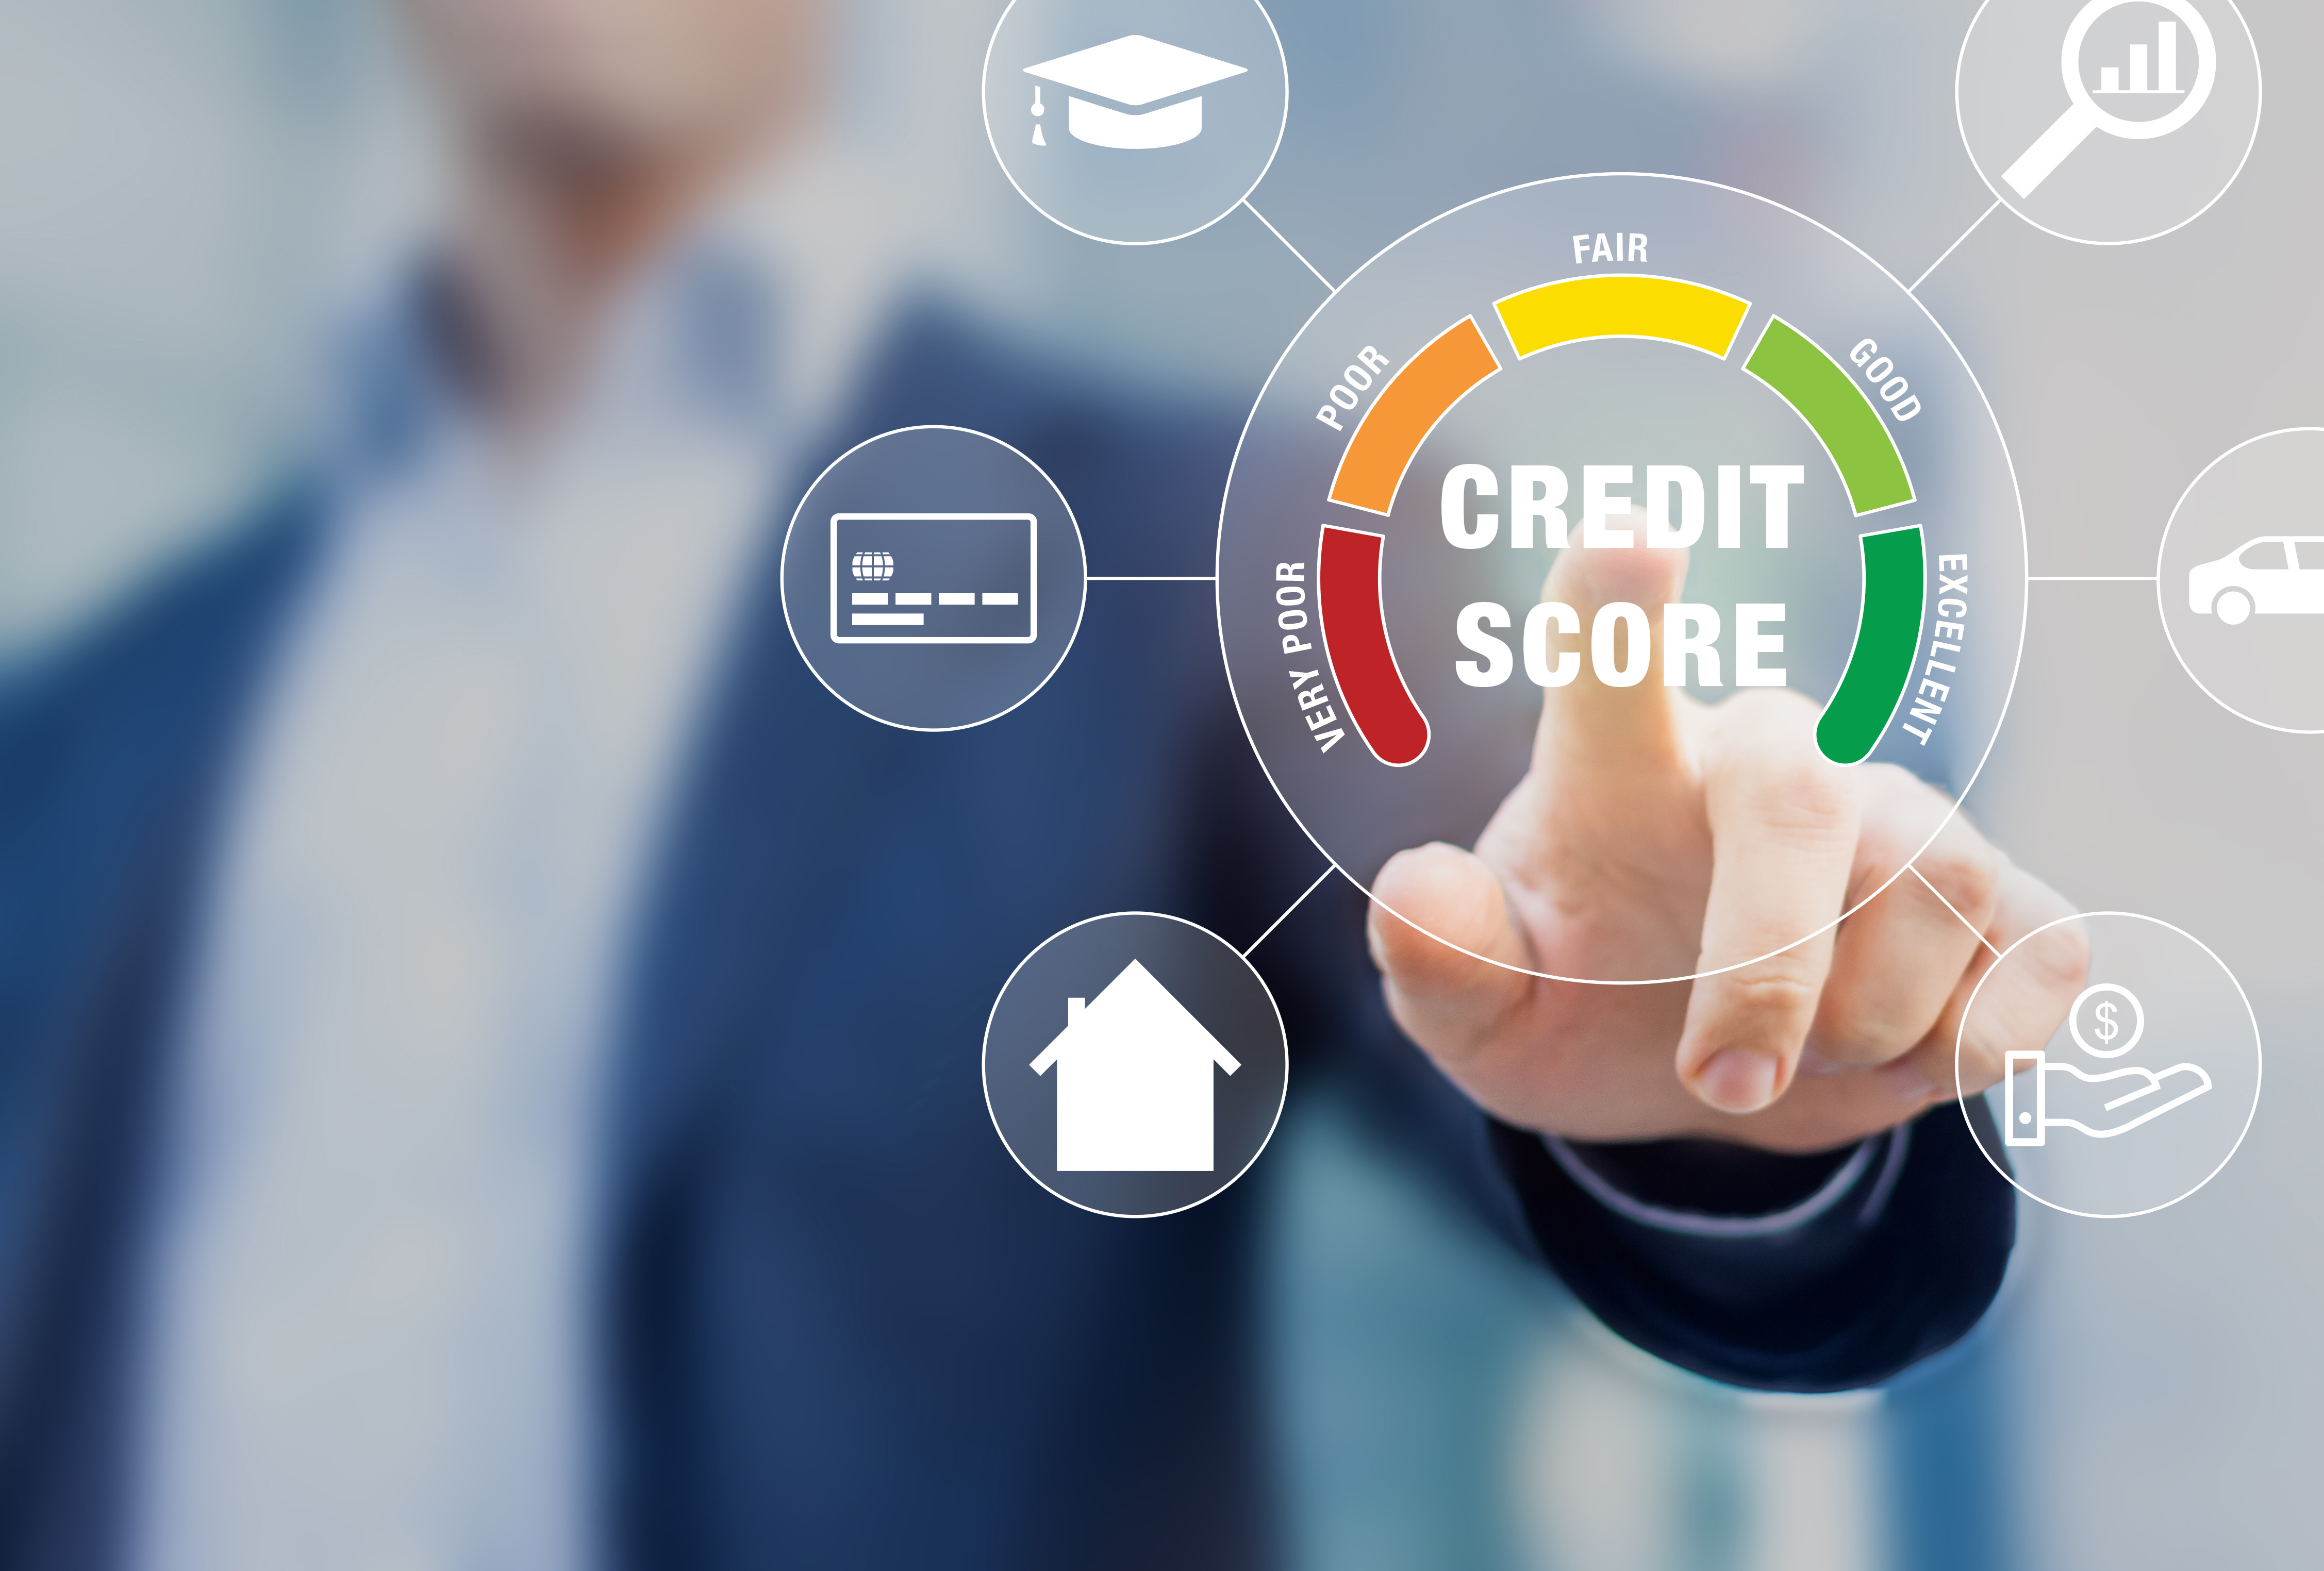 Is a 785 credit score good or bad? Source: AdobeStock.